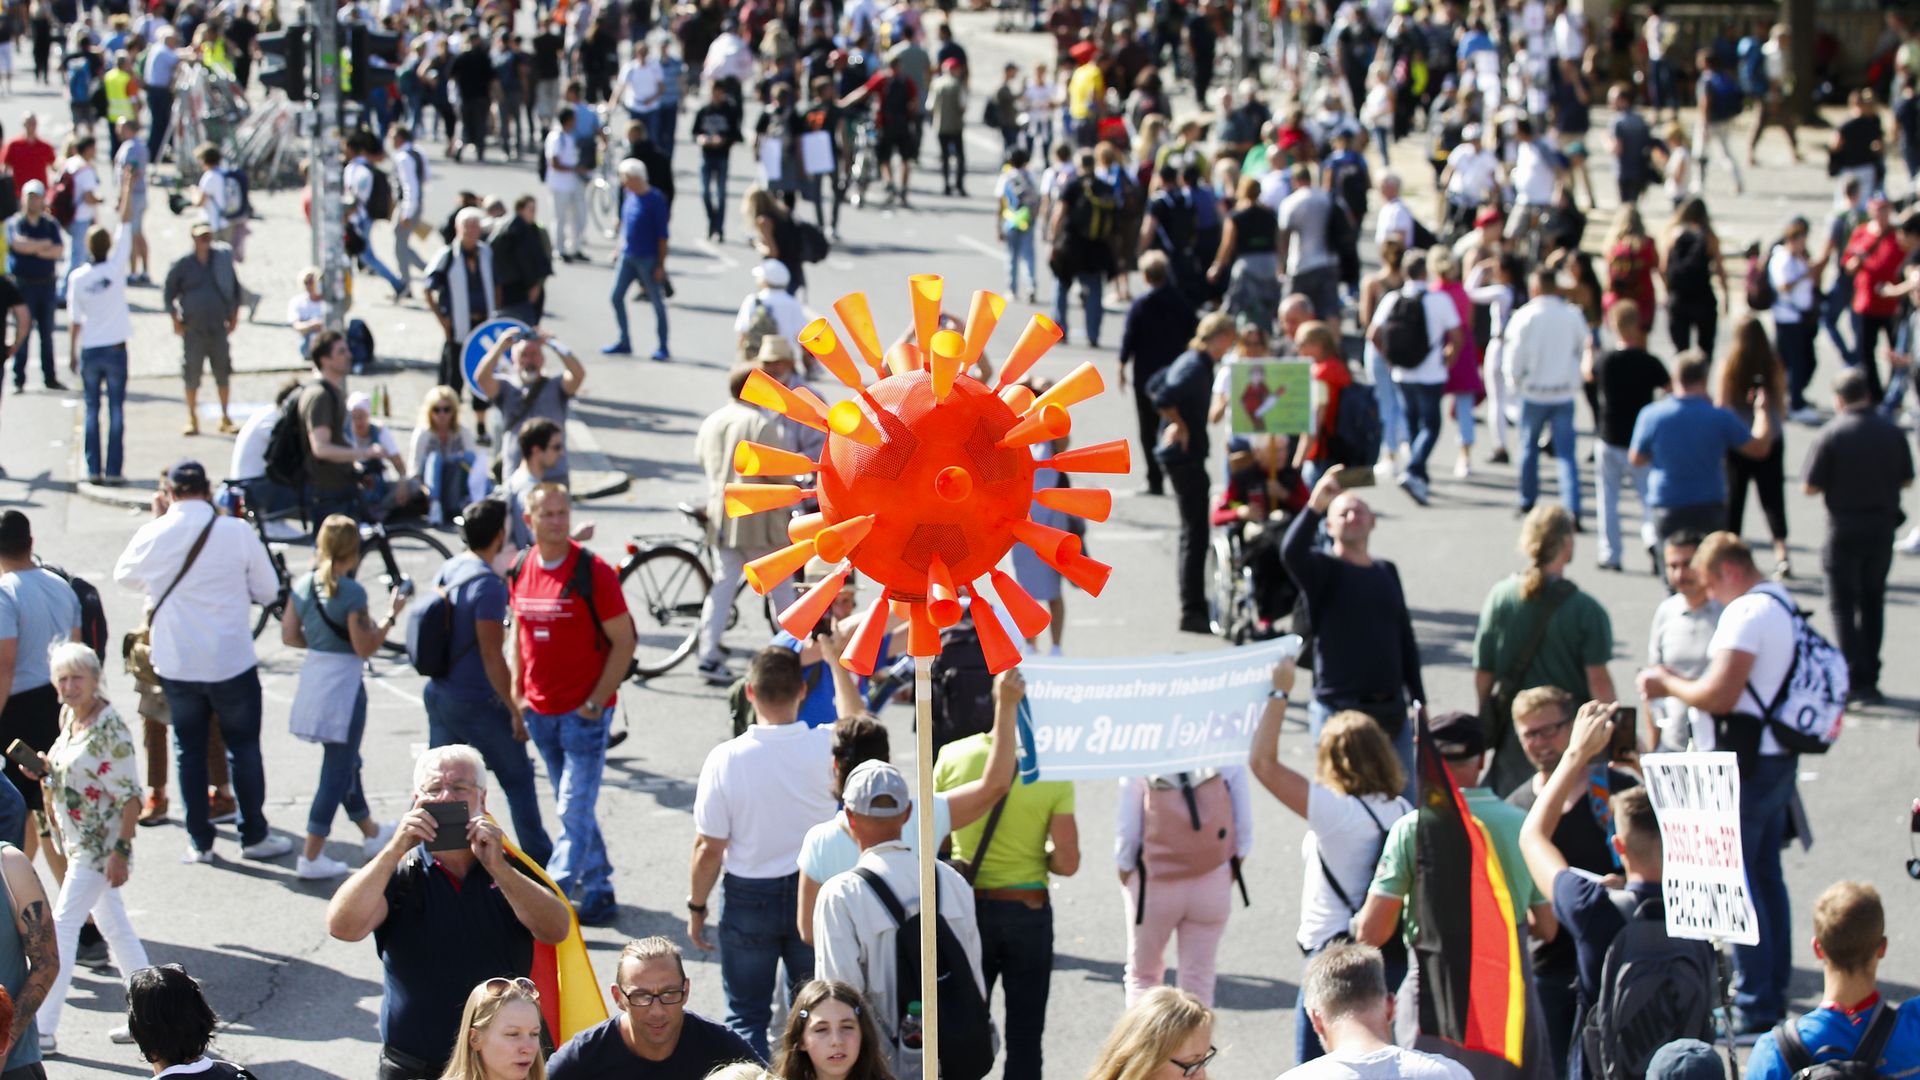 A representation of the coronavirus at a Berlin protest against Germany's virus restrictions on Aug. 28.